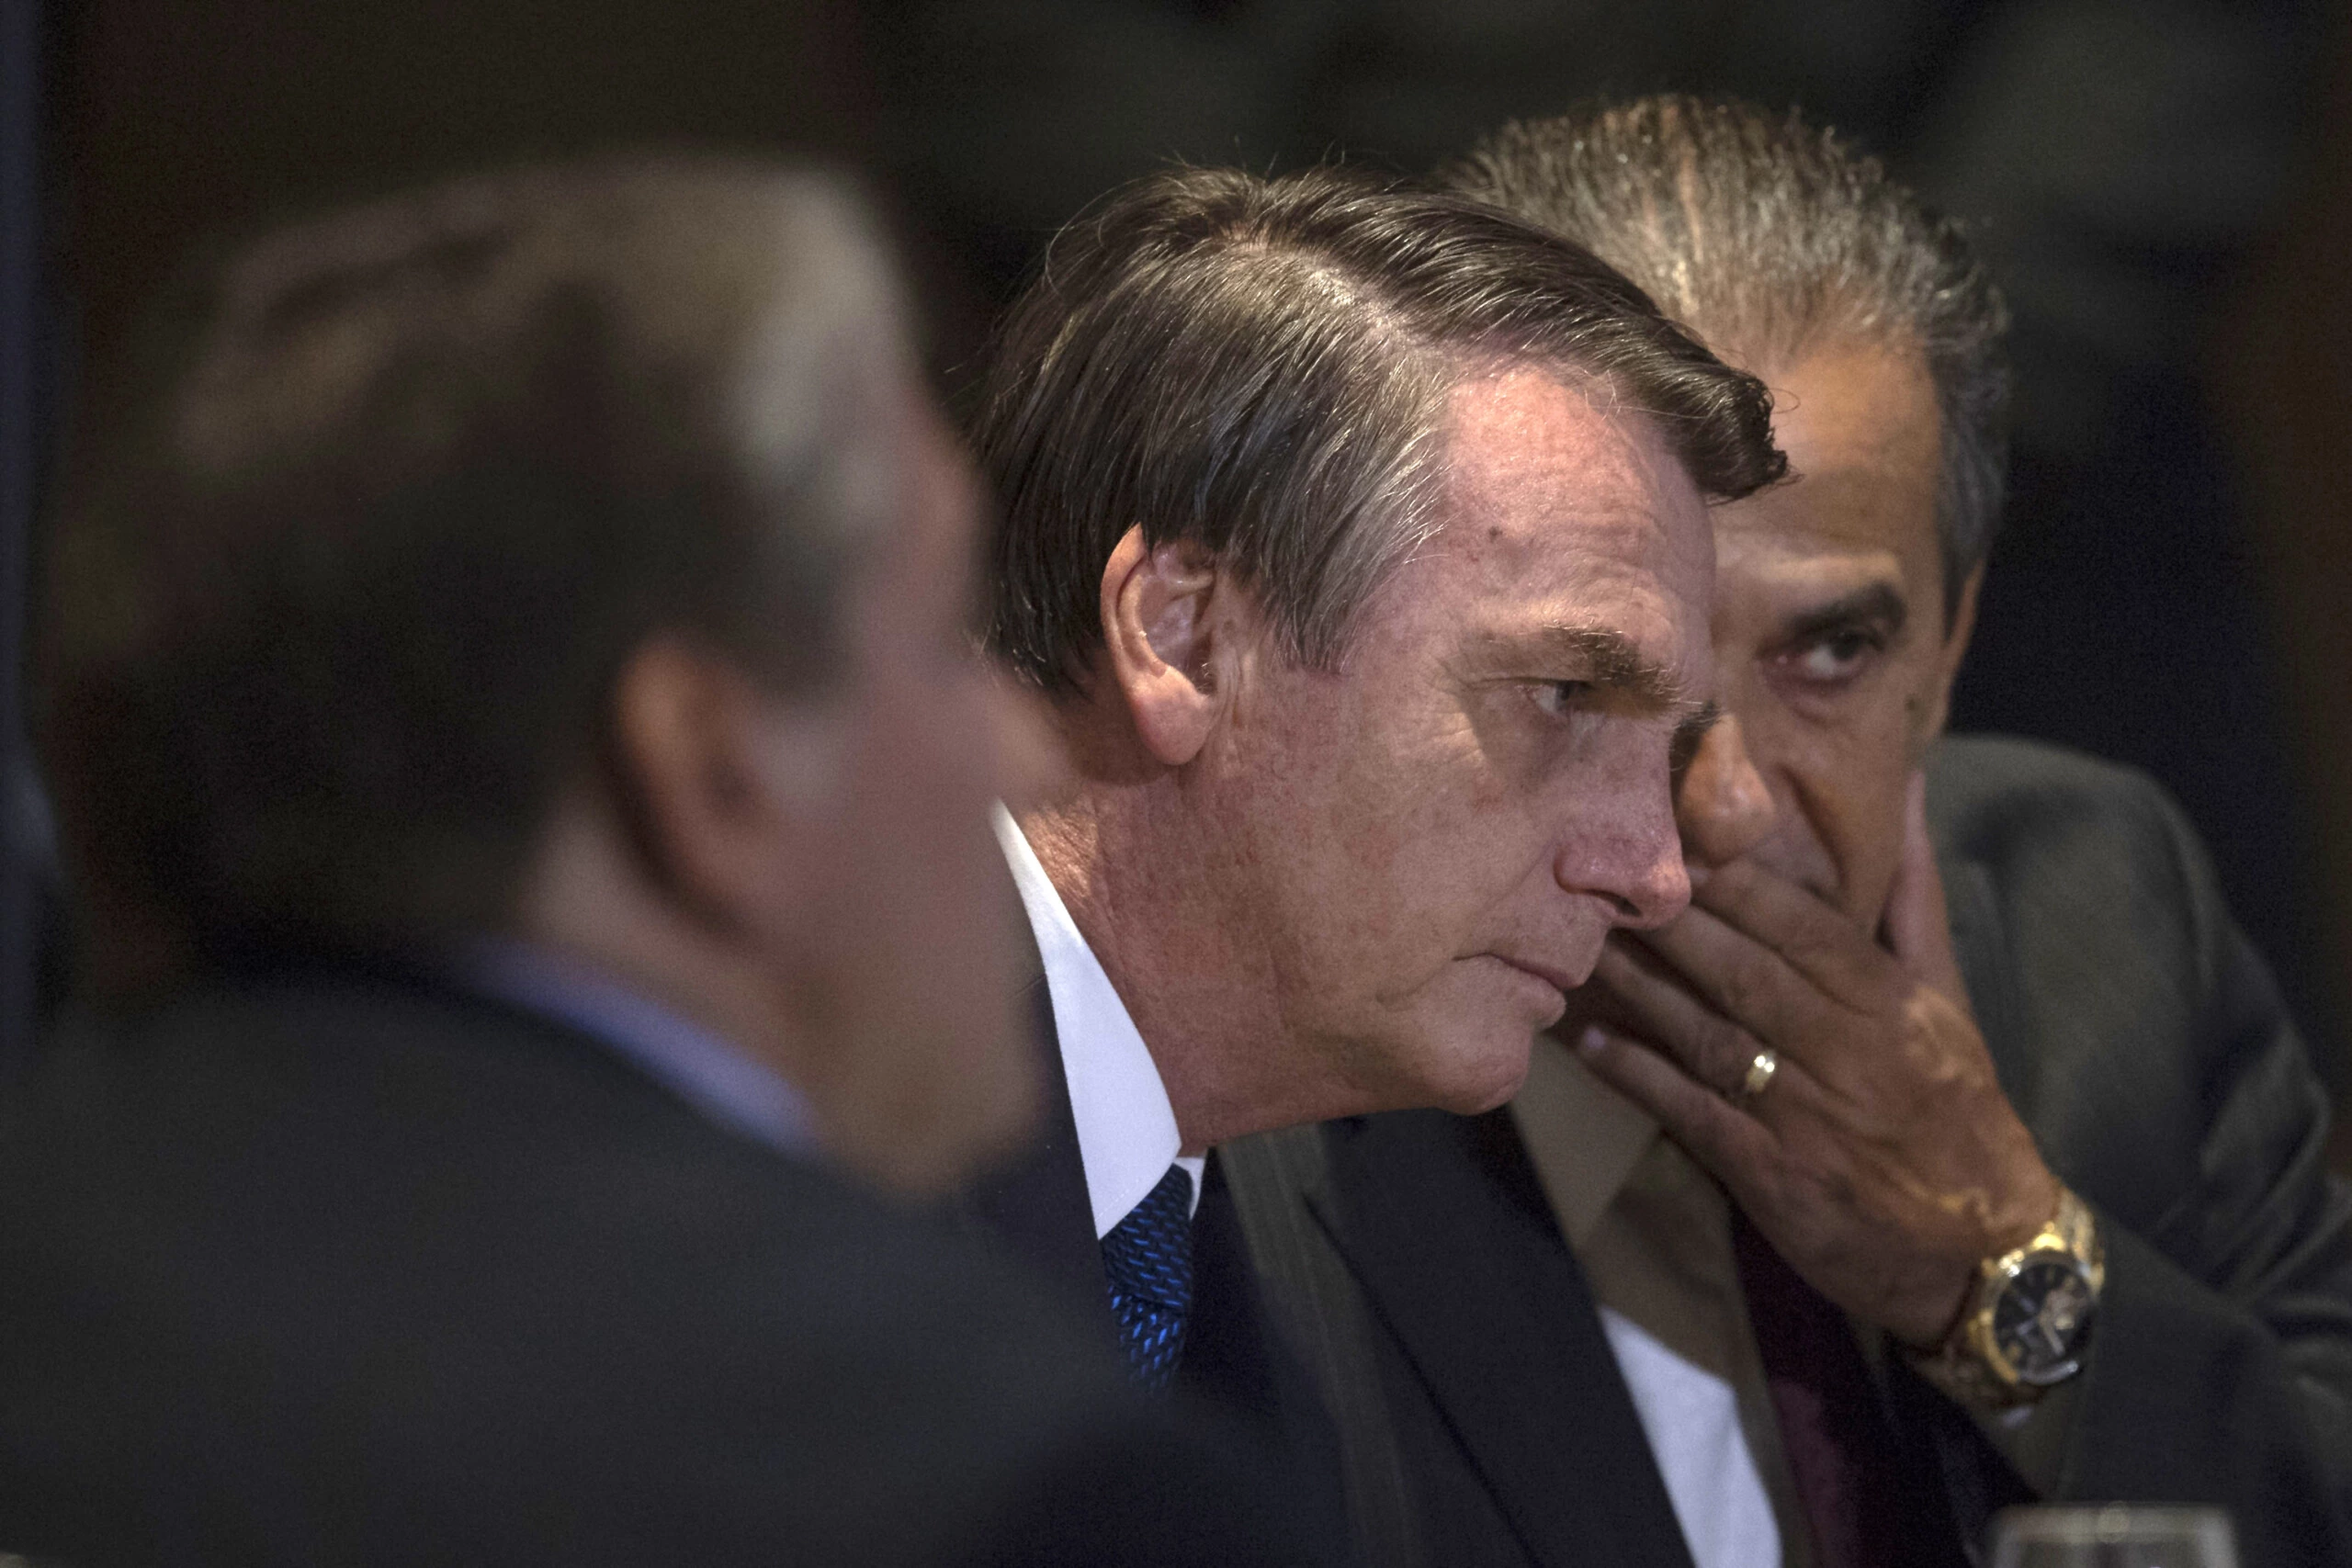 Brazilian President Jair Bolsonaro speaks with Brazilian Congressman and Bishop Silas Malafaia (R) during a meeting with evangelical leaders at the Hilton Barra Hotel, in Barra da Tijuca neighborhood, Rio de Janeiro, Brazil on April 11, 2019. (Photo by Mauro Pimentel / AFP)        (Photo credit should read MAURO PIMENTEL/AFP via Getty Images)